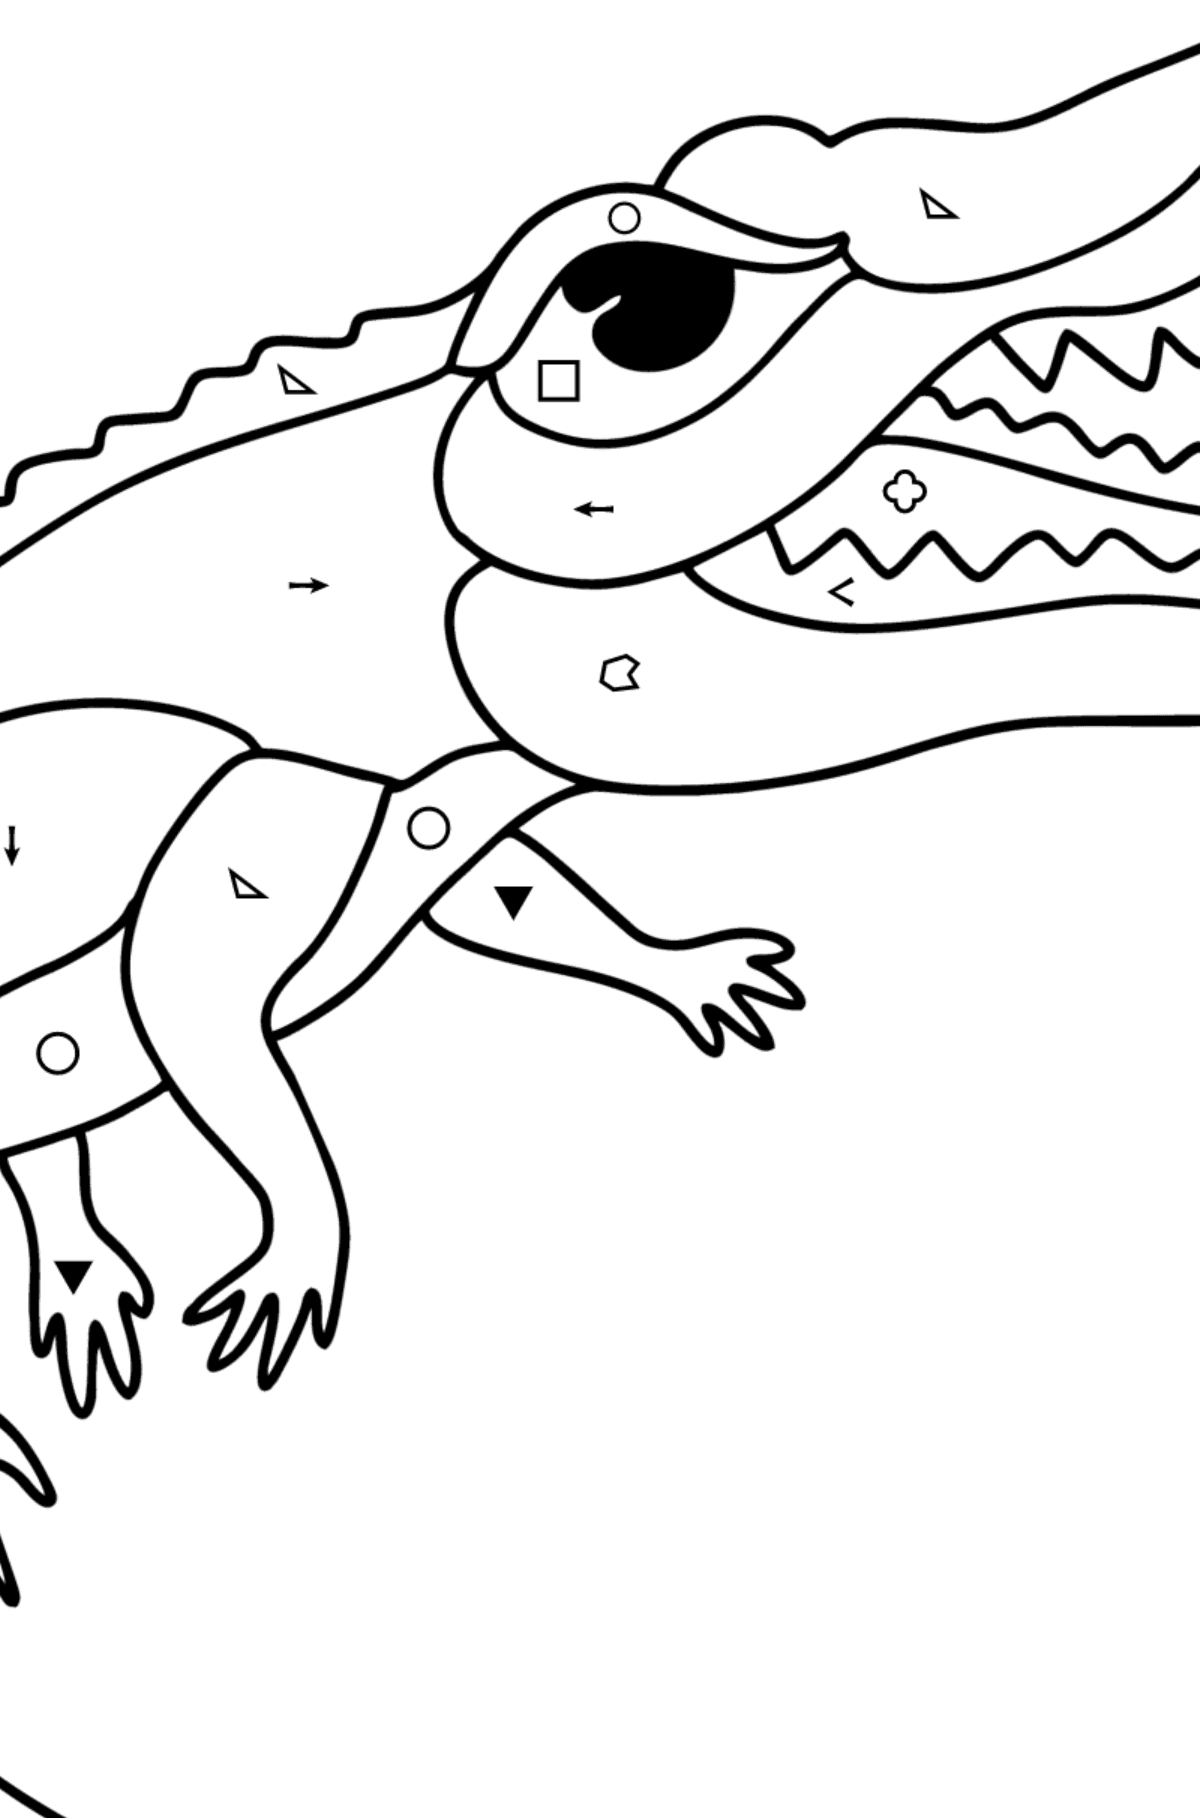 Saltwater Crocodile сoloring page - Coloring by Symbols and Geometric Shapes for Kids